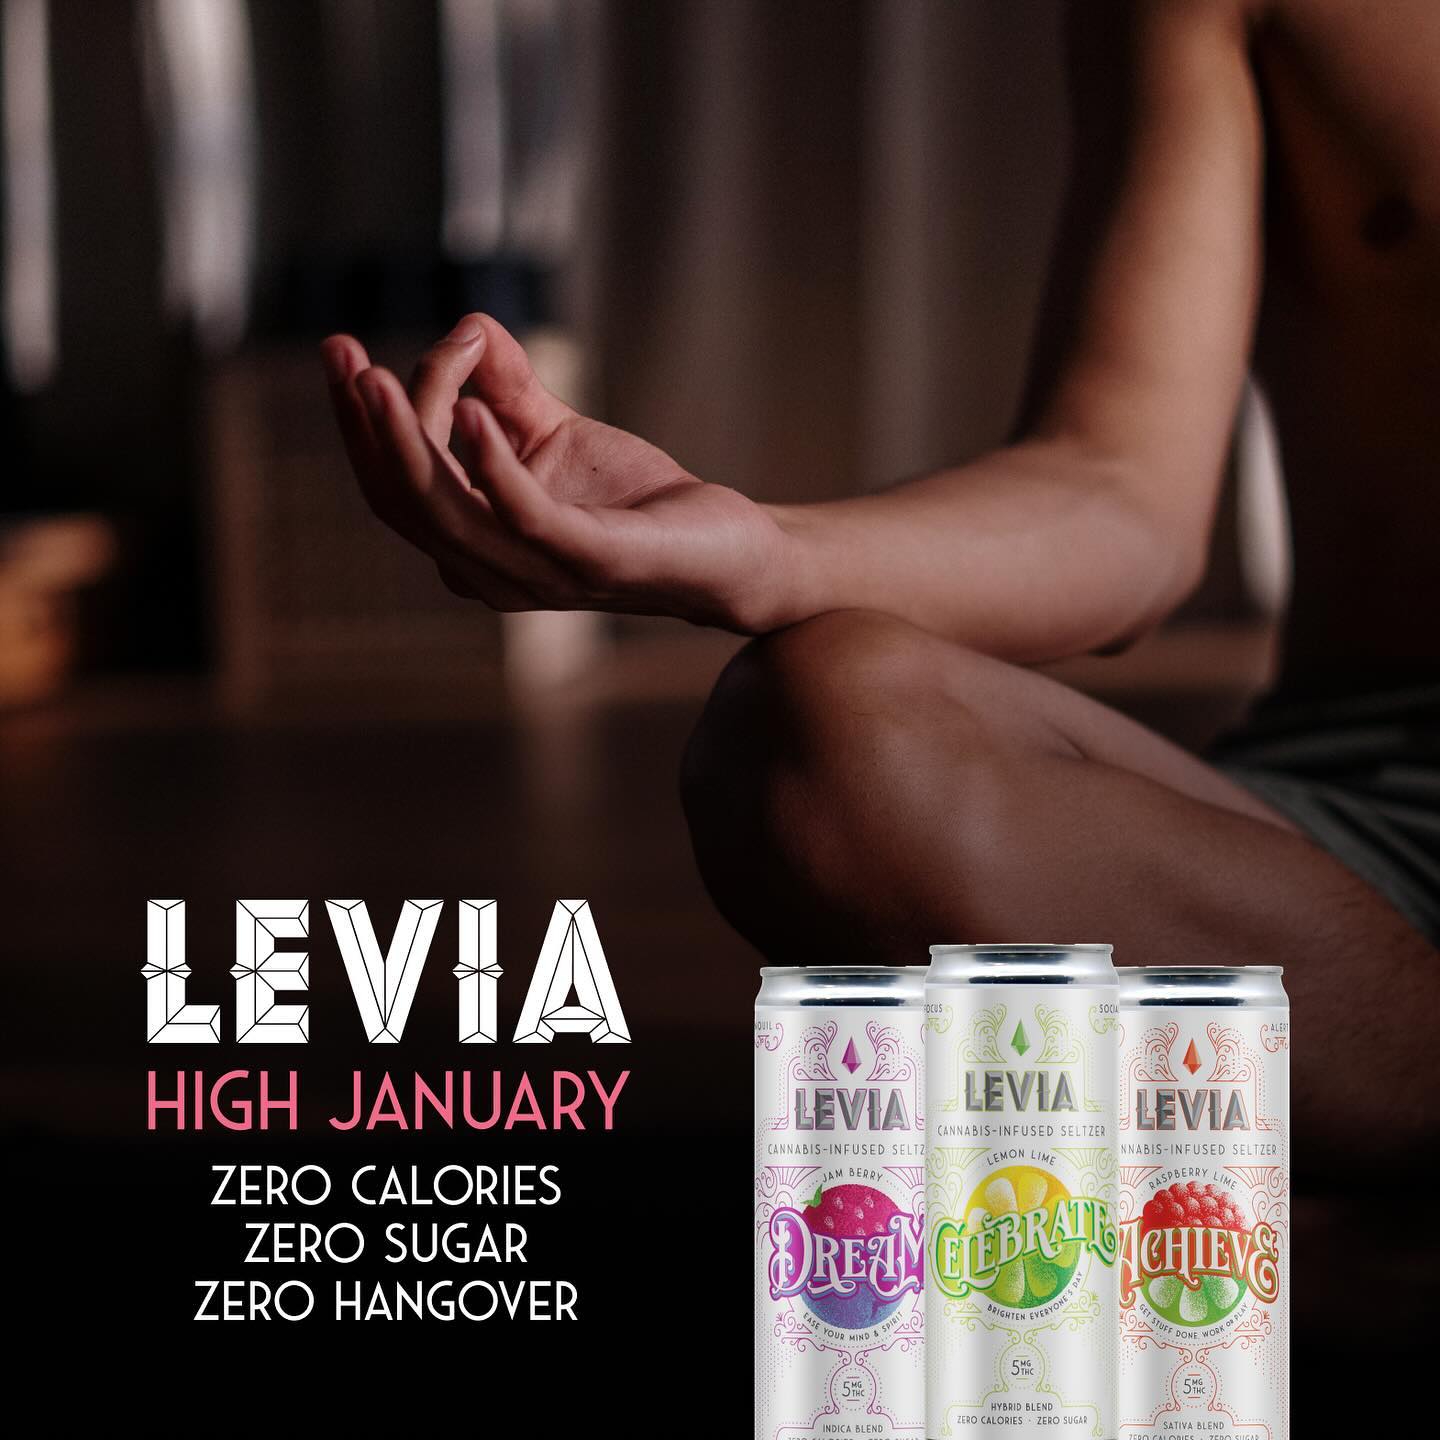 Sparkle Without the GuiltTry LEVIA’s Zero Calorie, Zero Sugar Cannabis-infused Seltzer to Fuel your High January!Still time to grab a ticket to our High Yoga Event this Wednesday, January 26th at 6pm in Charlestown, MA!Link: https://www.dinner-at-marys.com/online-store/Canna-Yoga-1-24-Levia-p613373973️